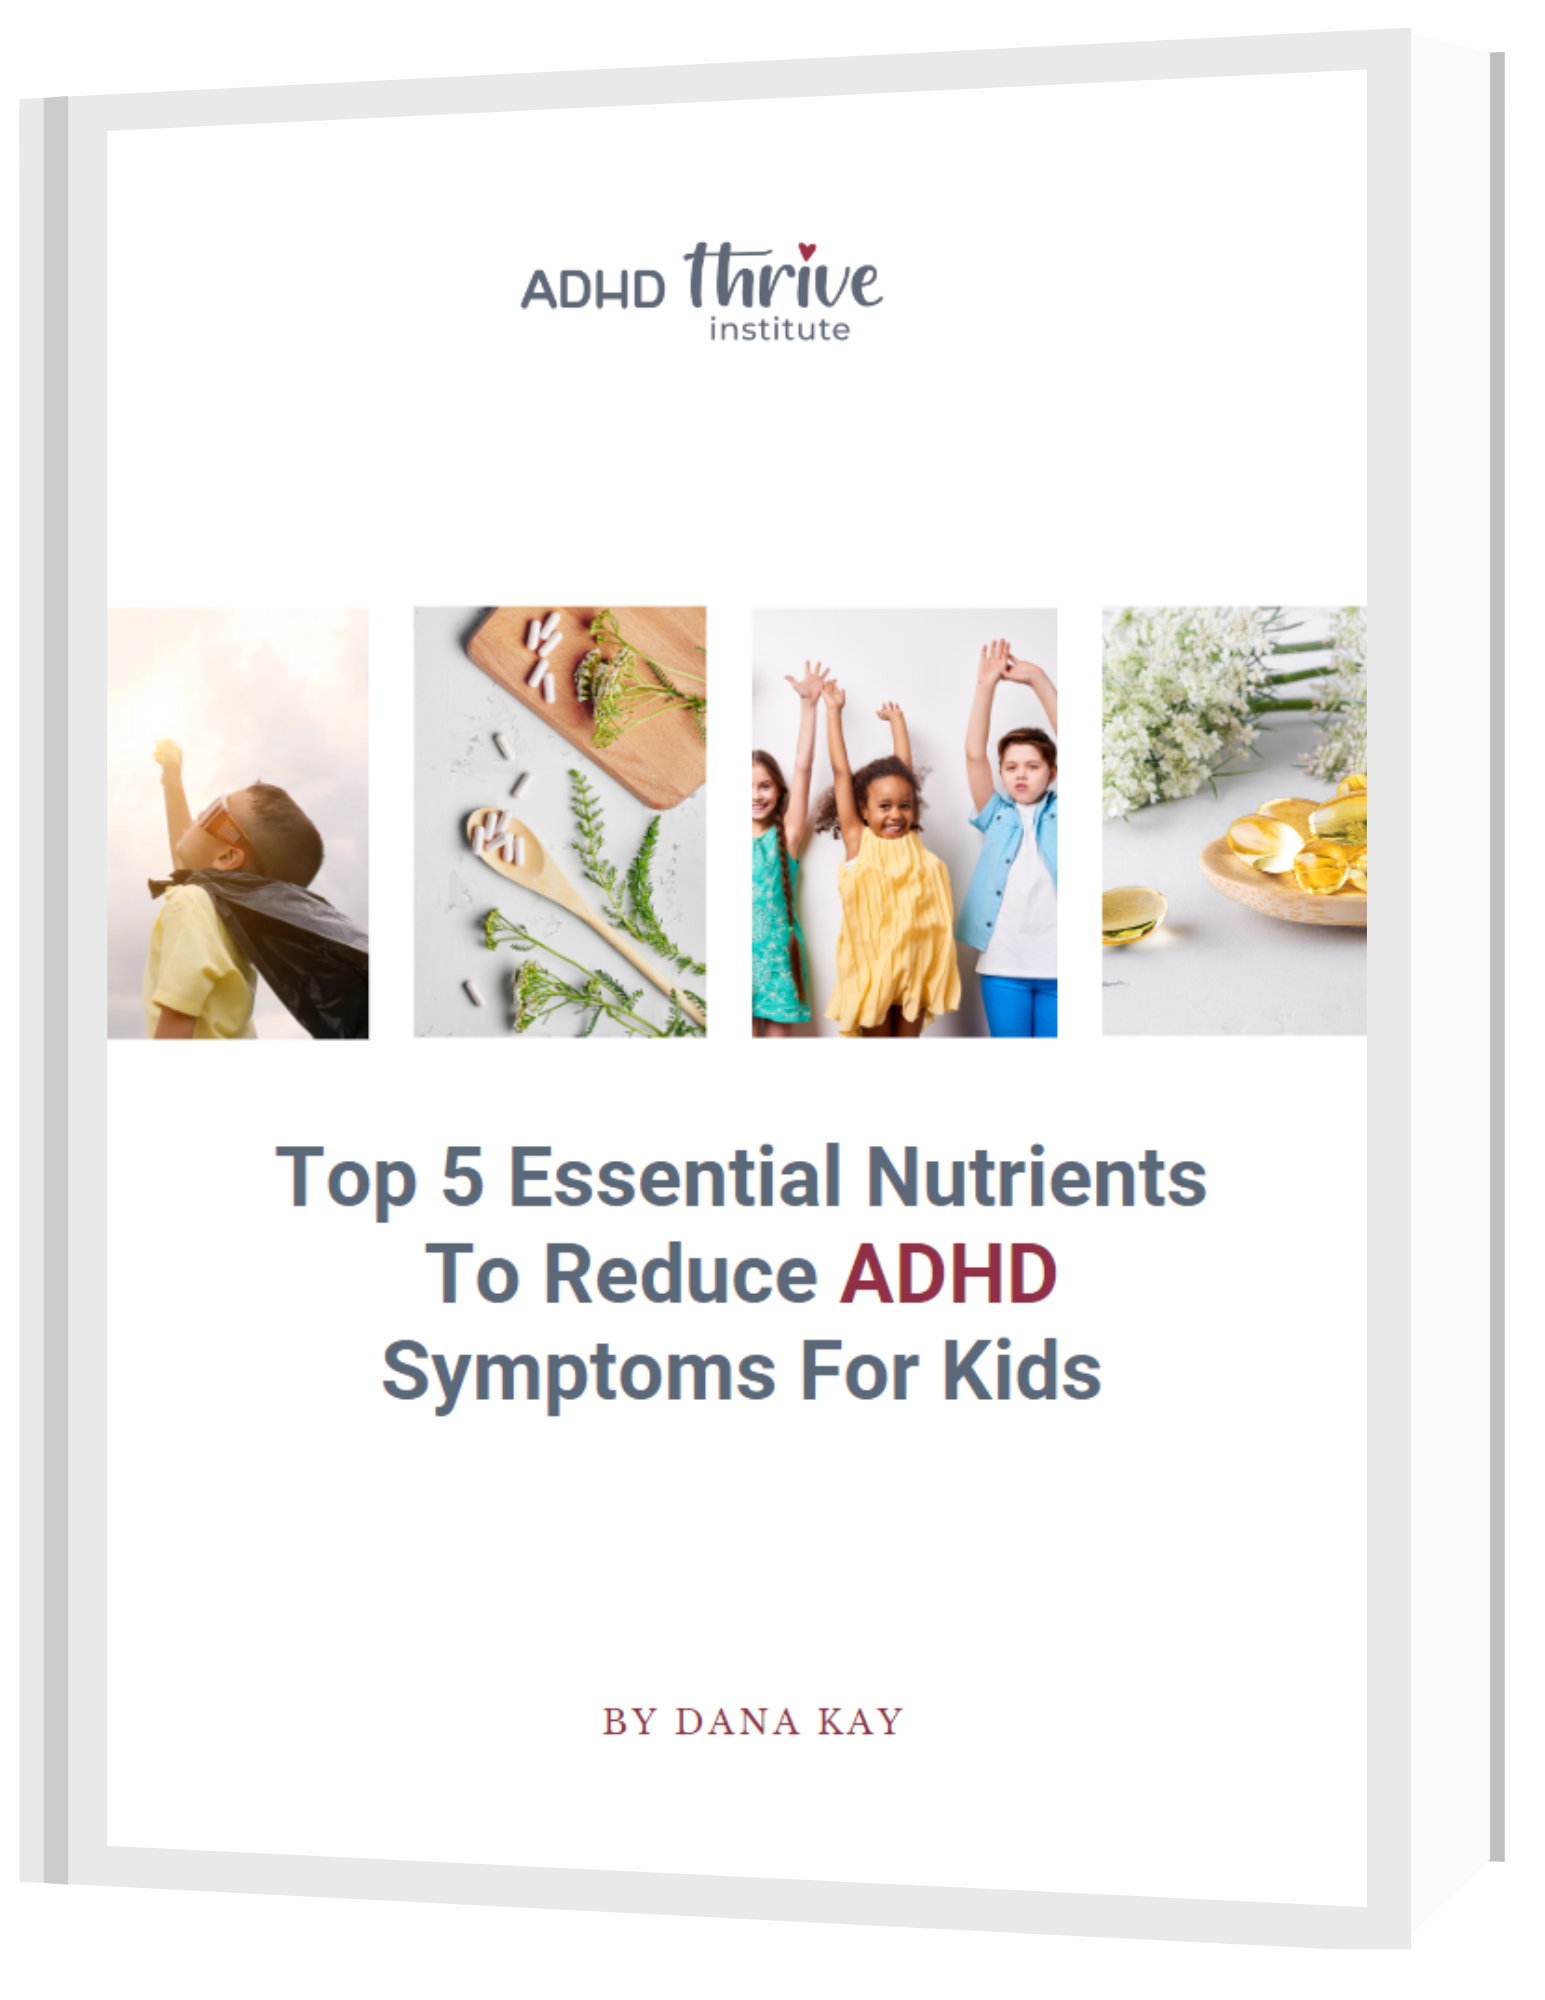 Top 5 Natural Supplements For Kids With ADHD